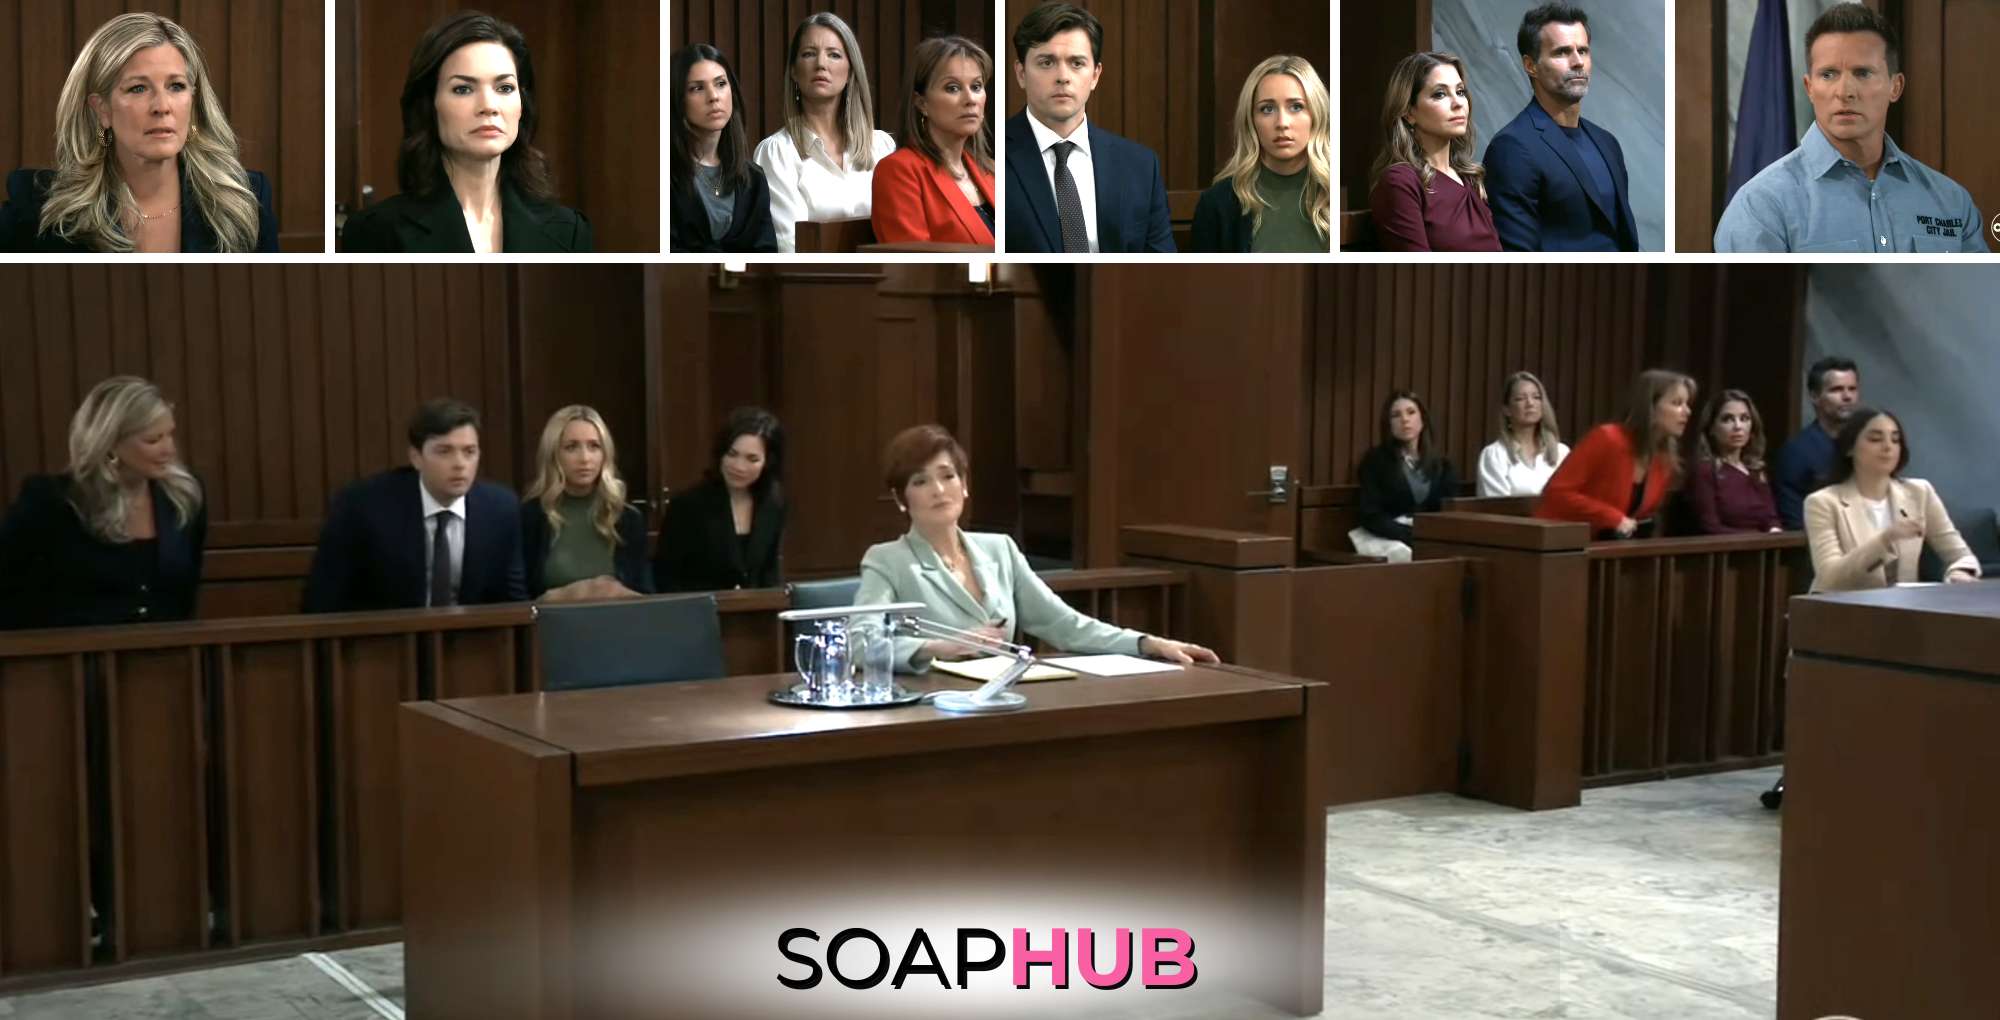 Jason’s Fan Club Filled The Courthouse At His Arraignment On General Hospital